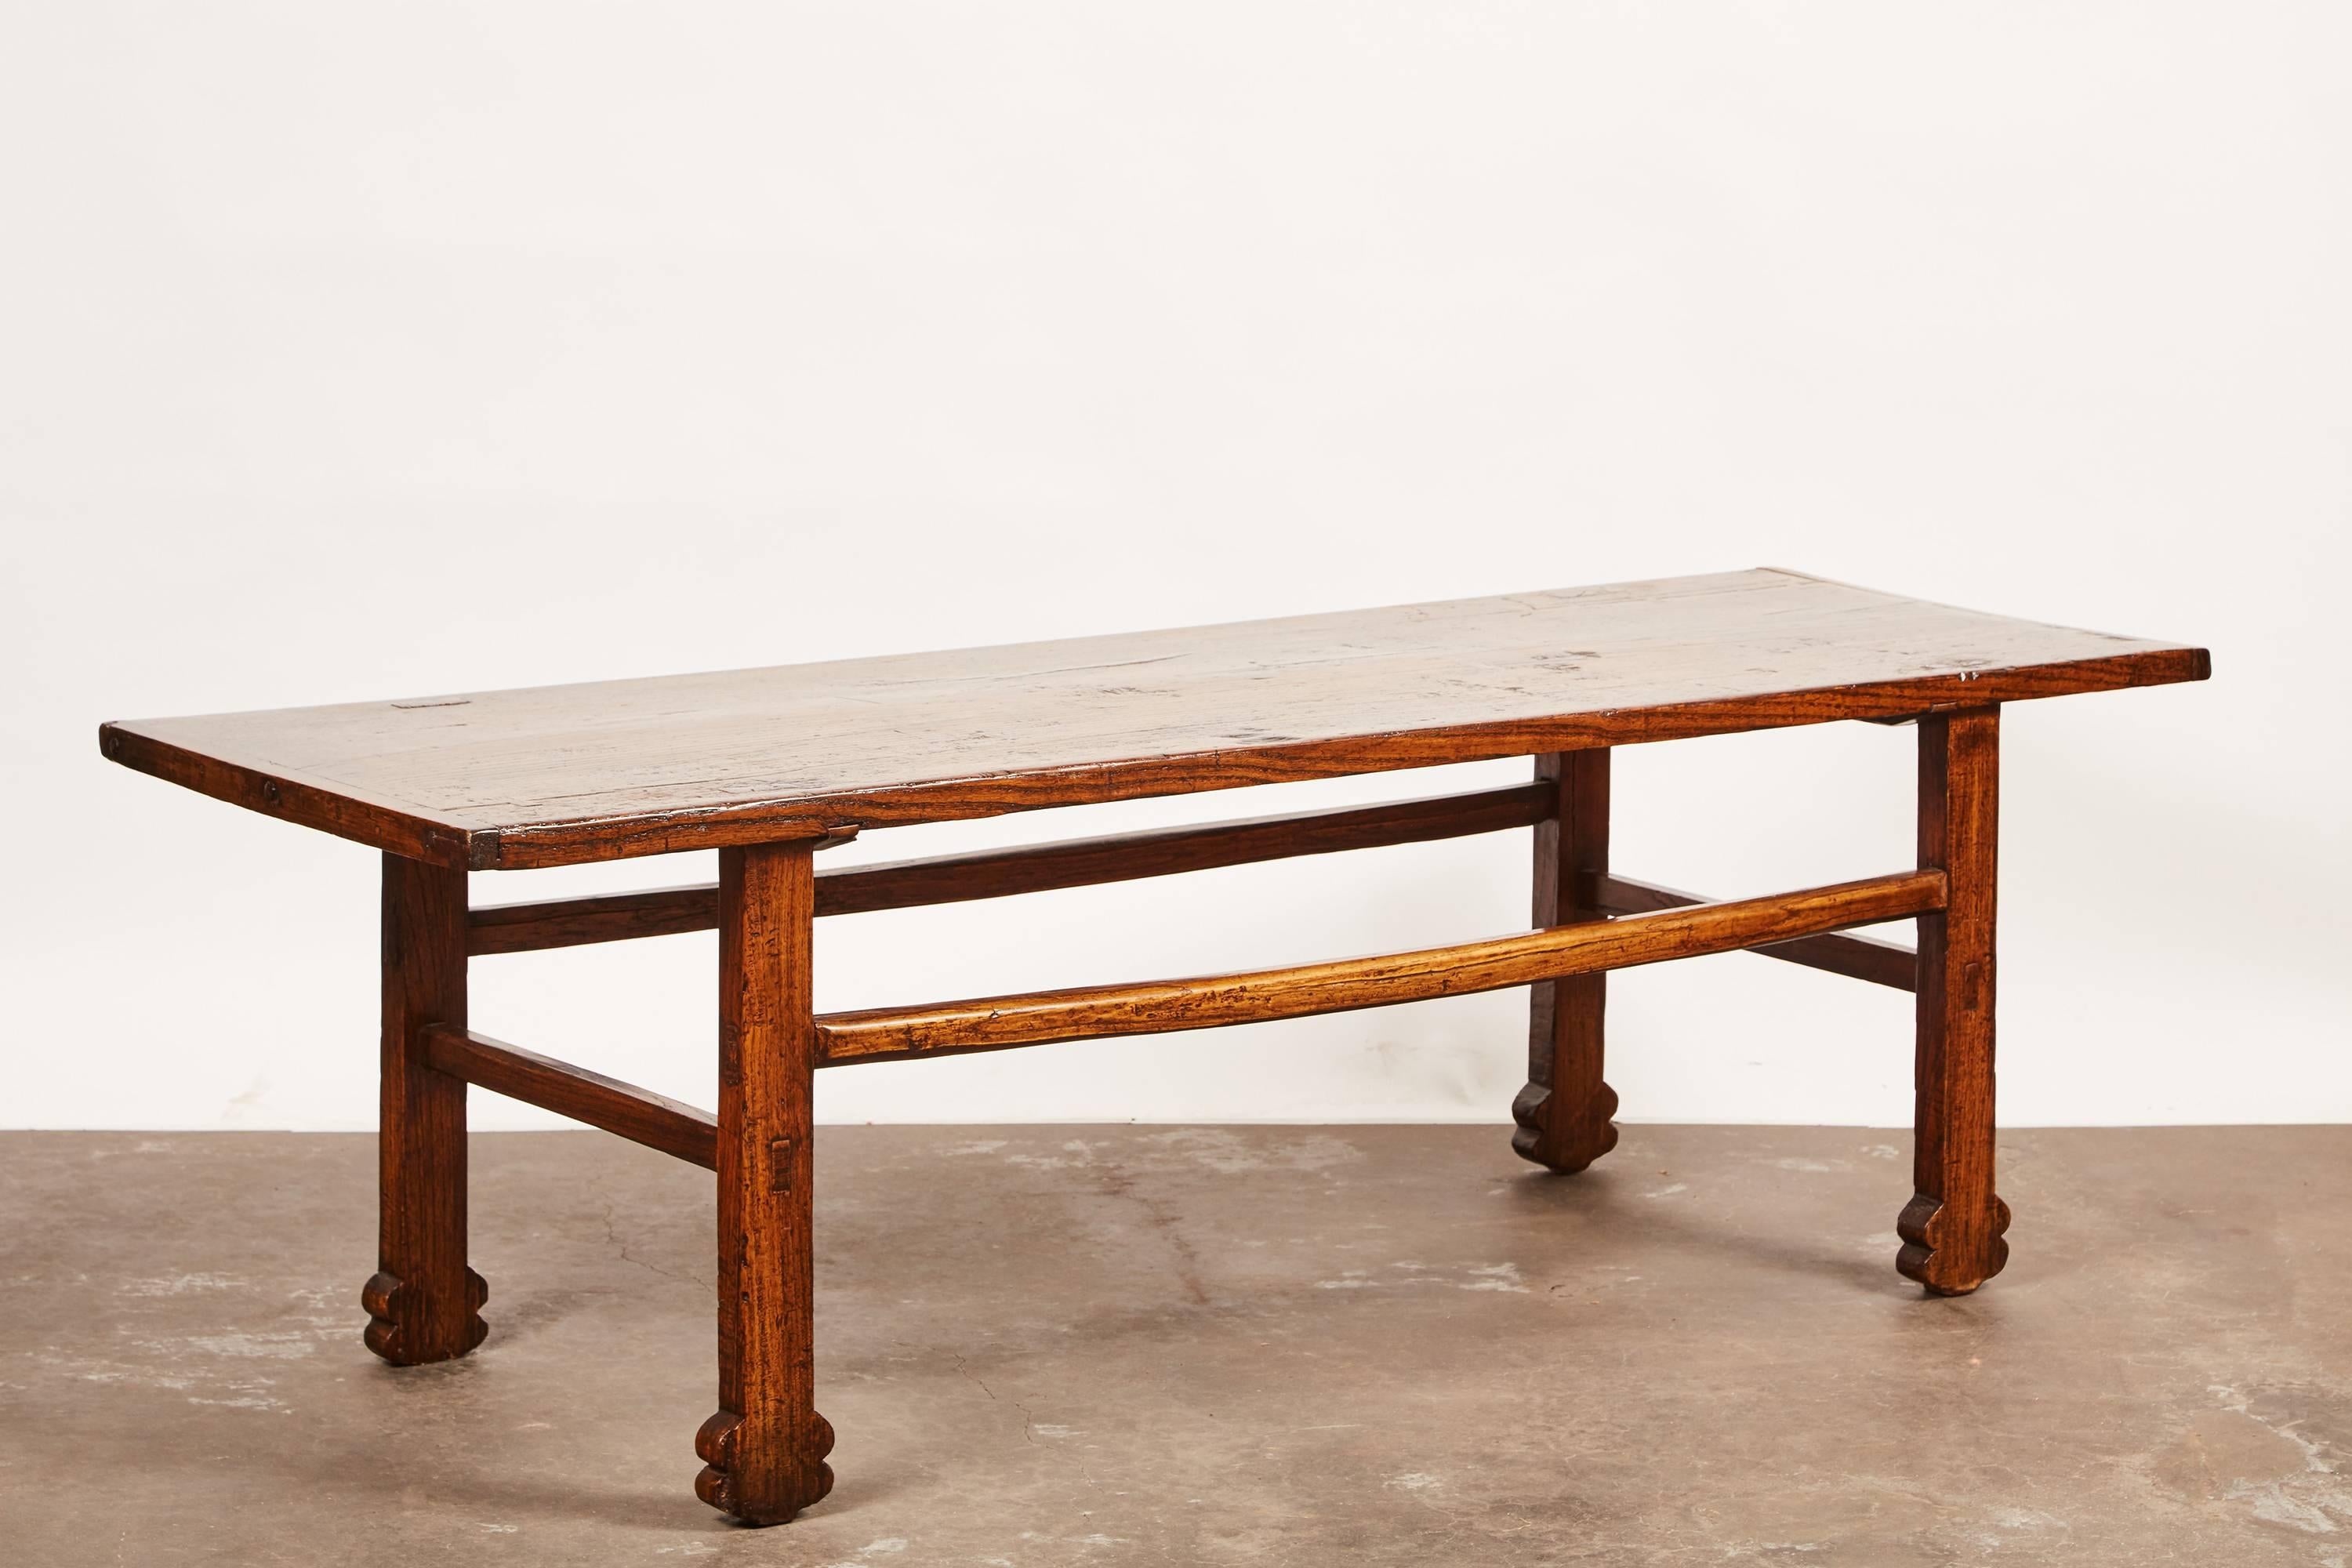 A “one of a kind” kang table - otherwise known as either a low table or a chair-level bed- with solid elmwood tabletop and plum feet. The table is originally from Shanxi, China.